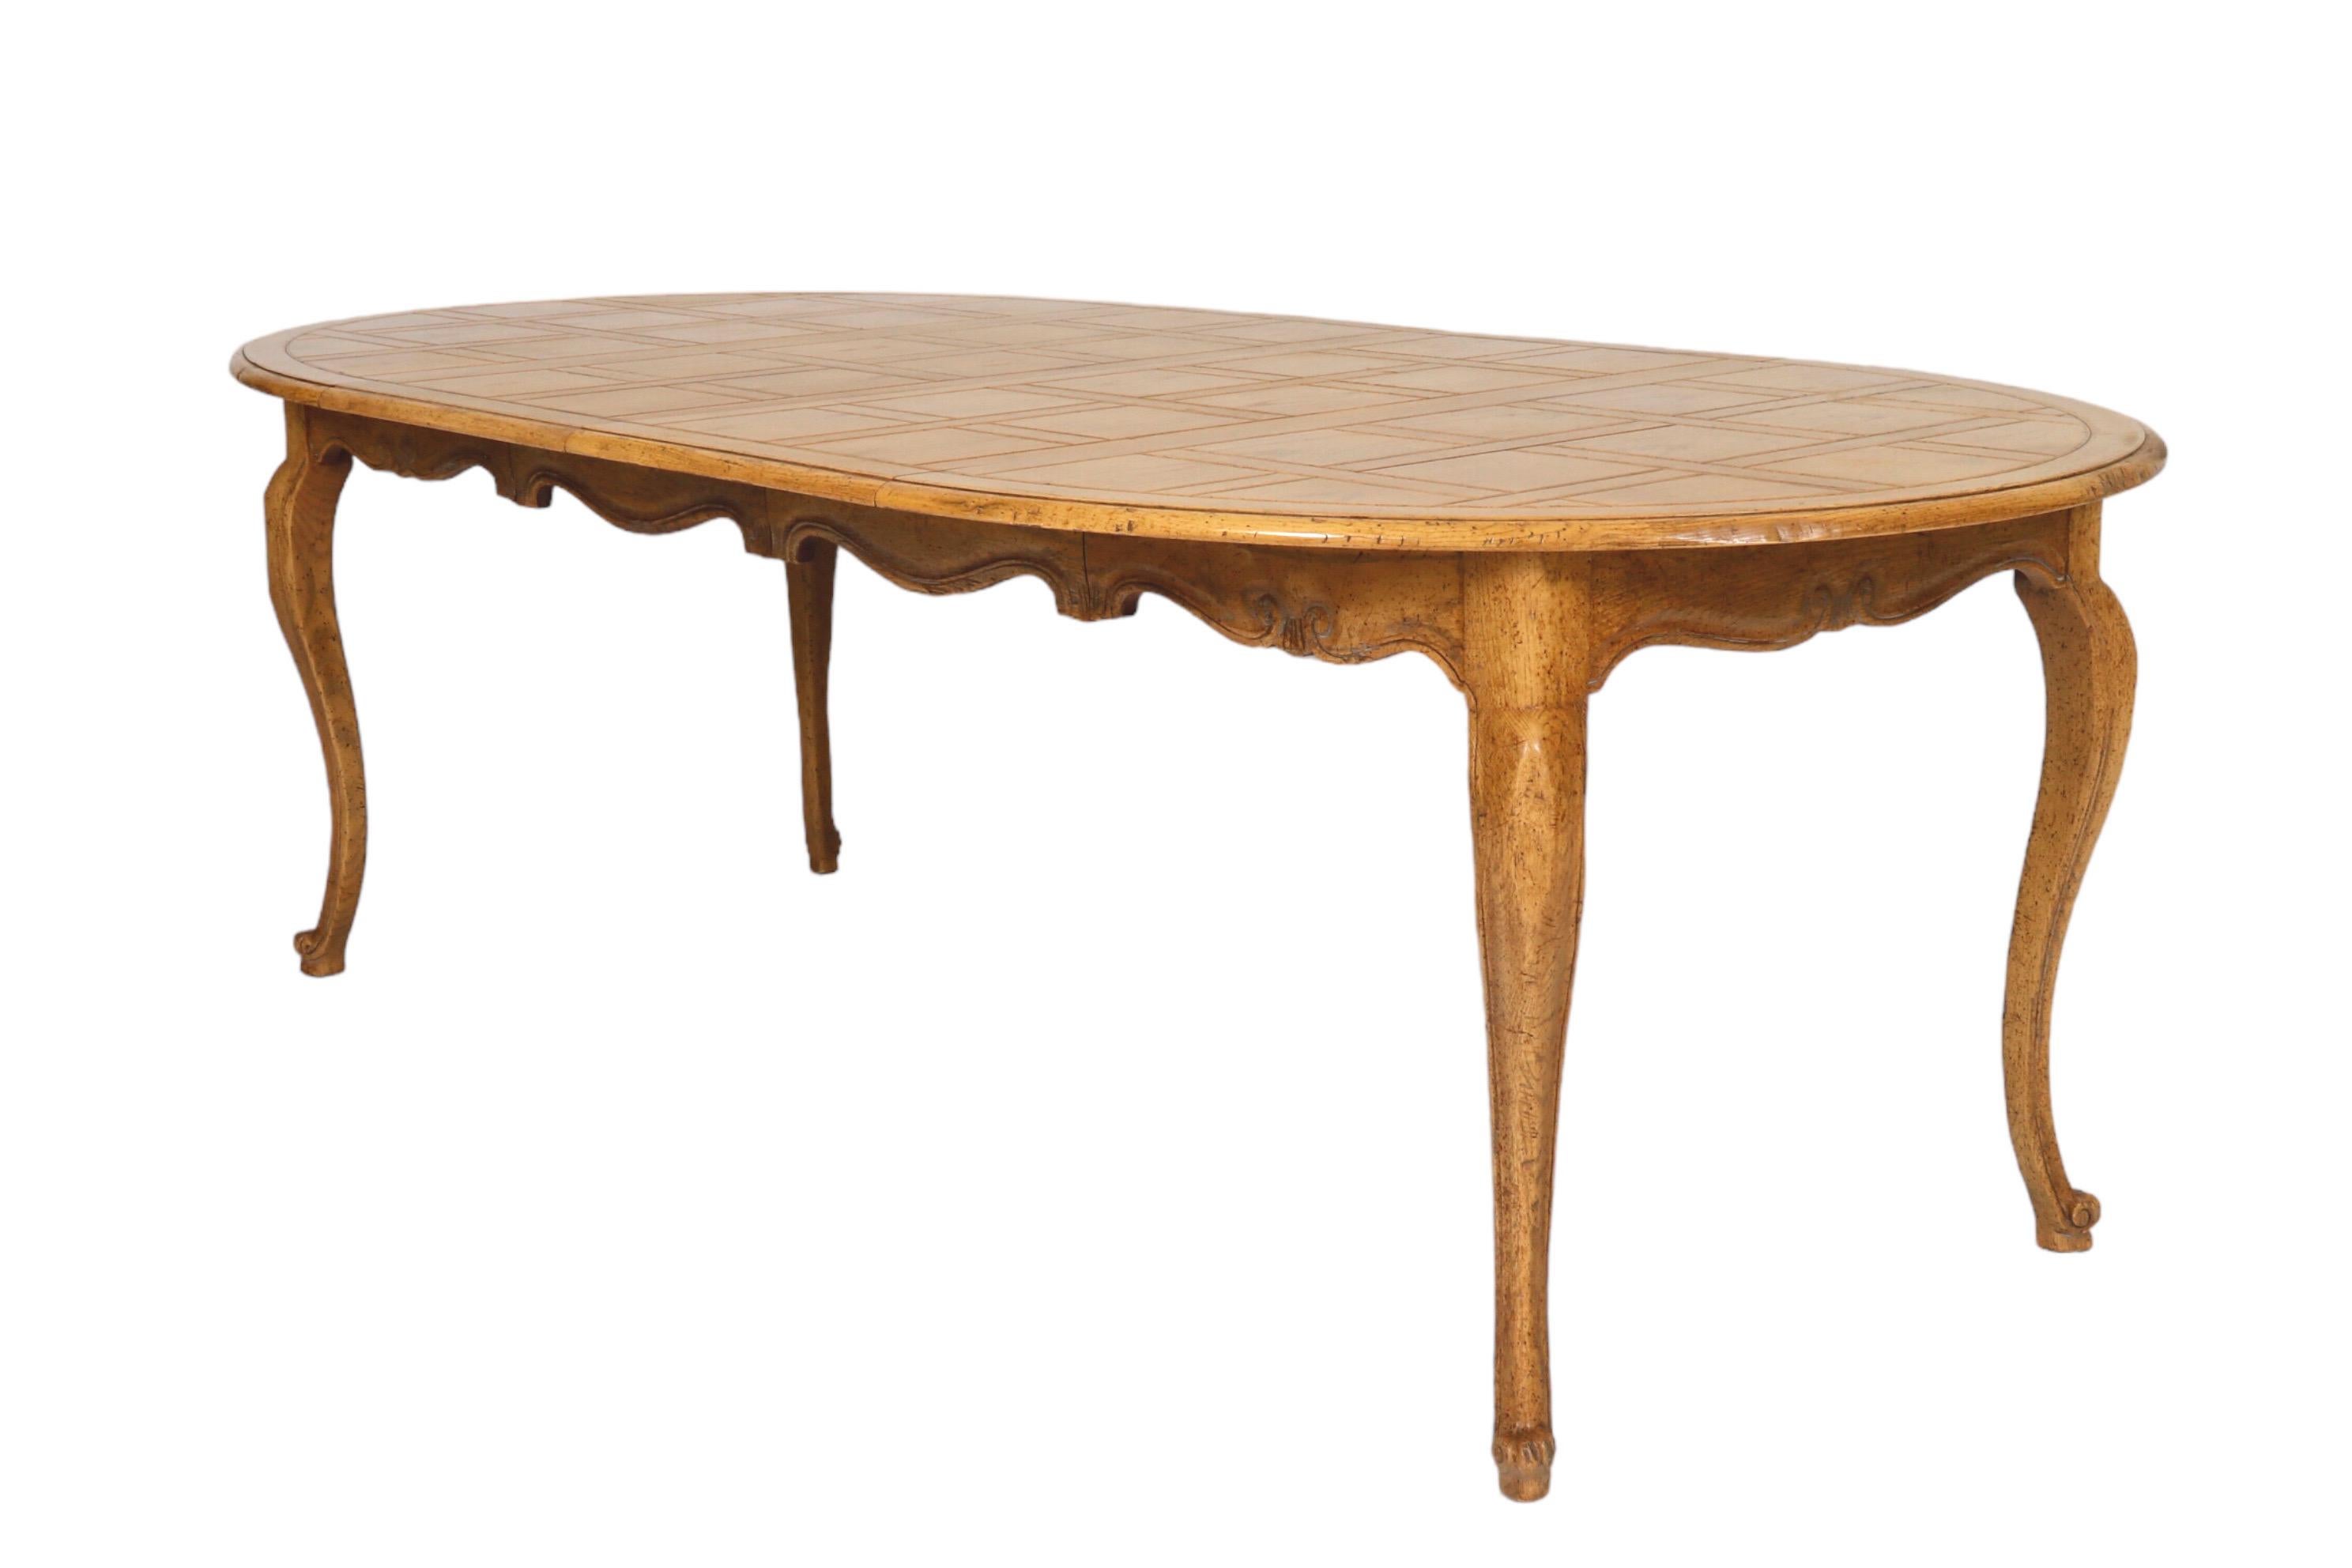 An oval French Country dining table made by Baker Furniture. The tabletop is decorated with carved lines in a Chantilly pattern. Below, a serpentine table skirt carved with s-scrolls along the edge meets four cabriole legs finished with whorl feet.